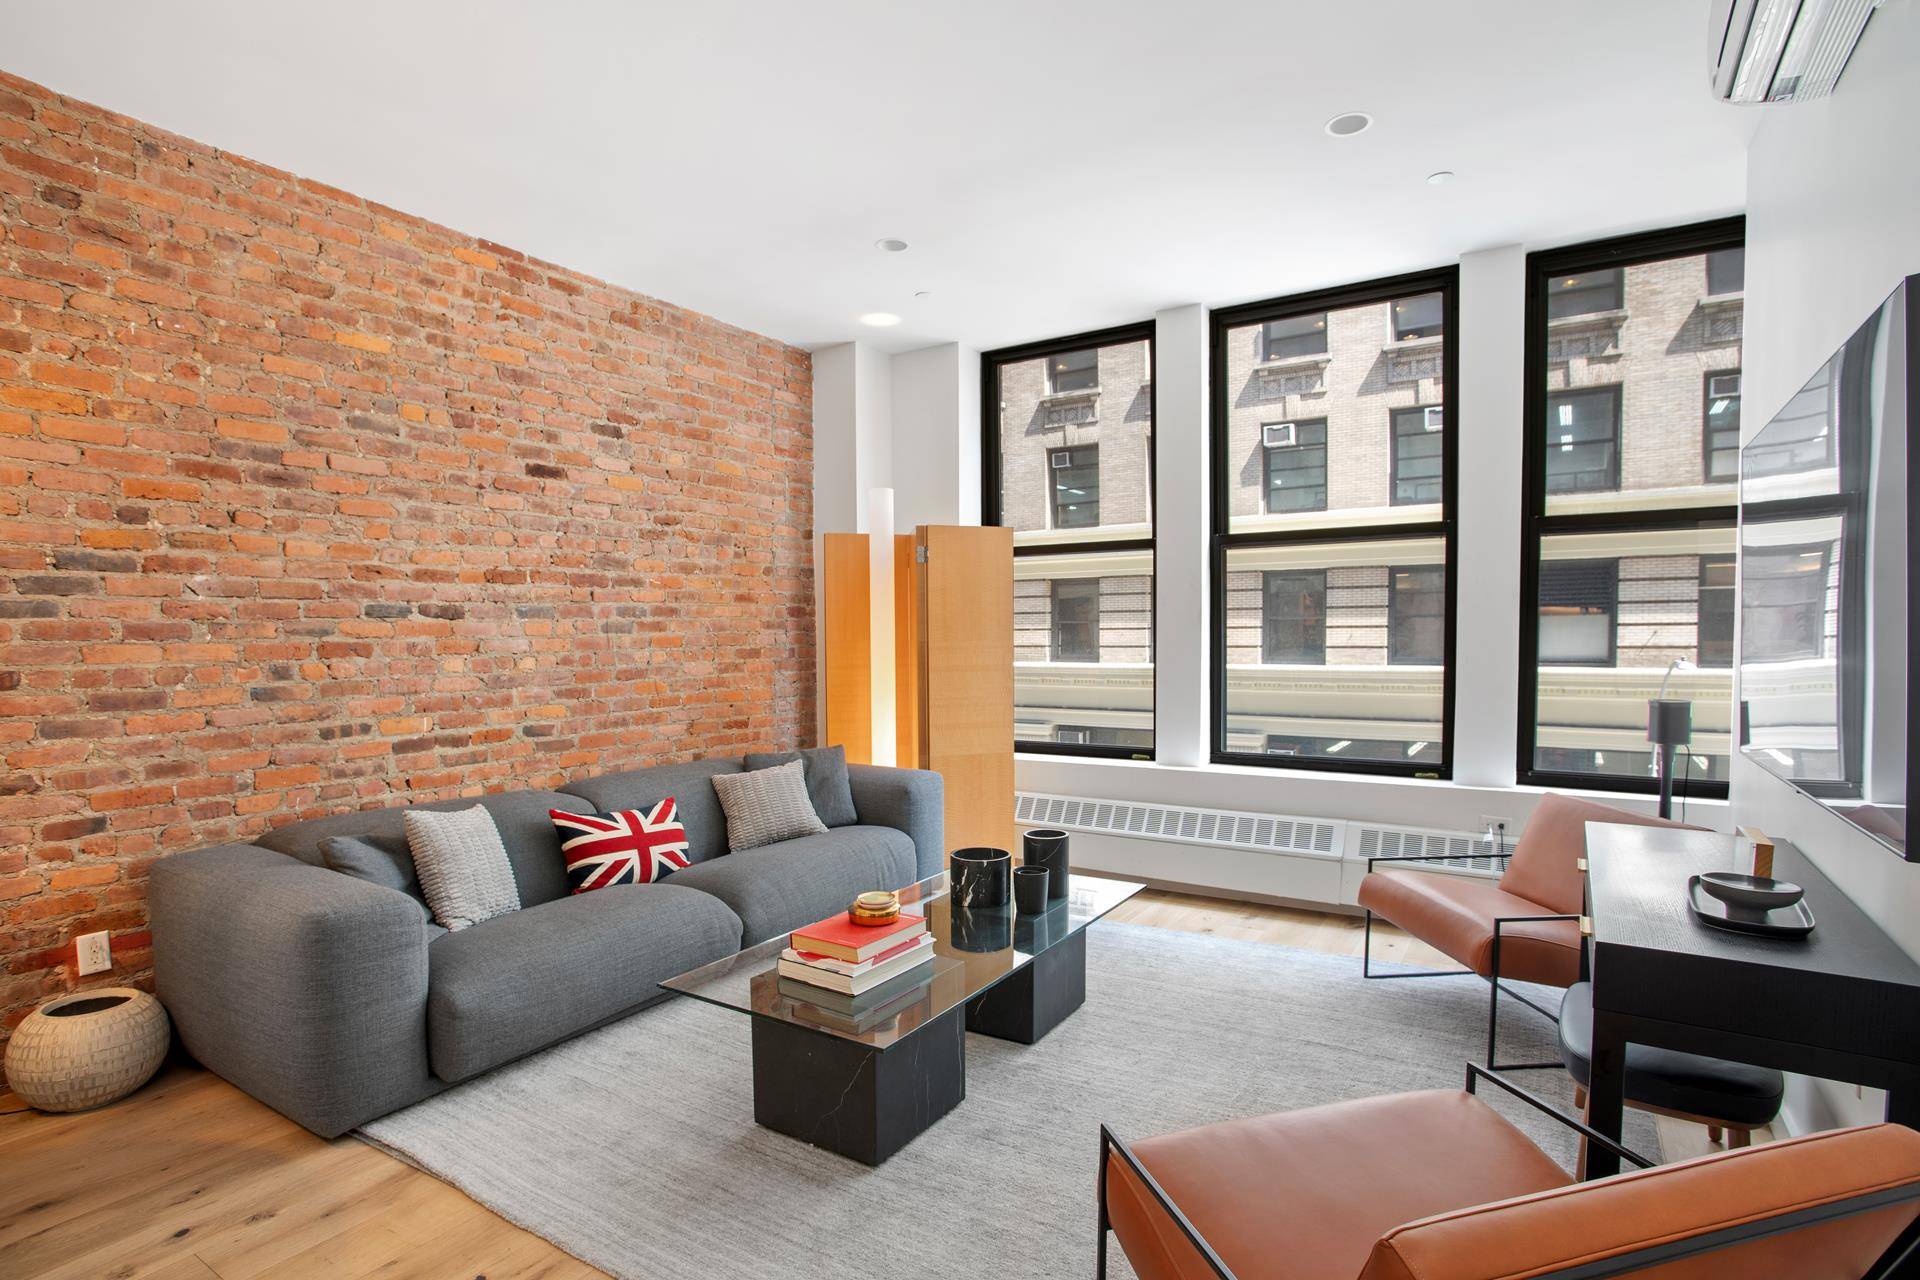 Welcome home to this brand new gut renovated 1, 200 SF 2 bedroom 2 bathroom Chelsea loft.